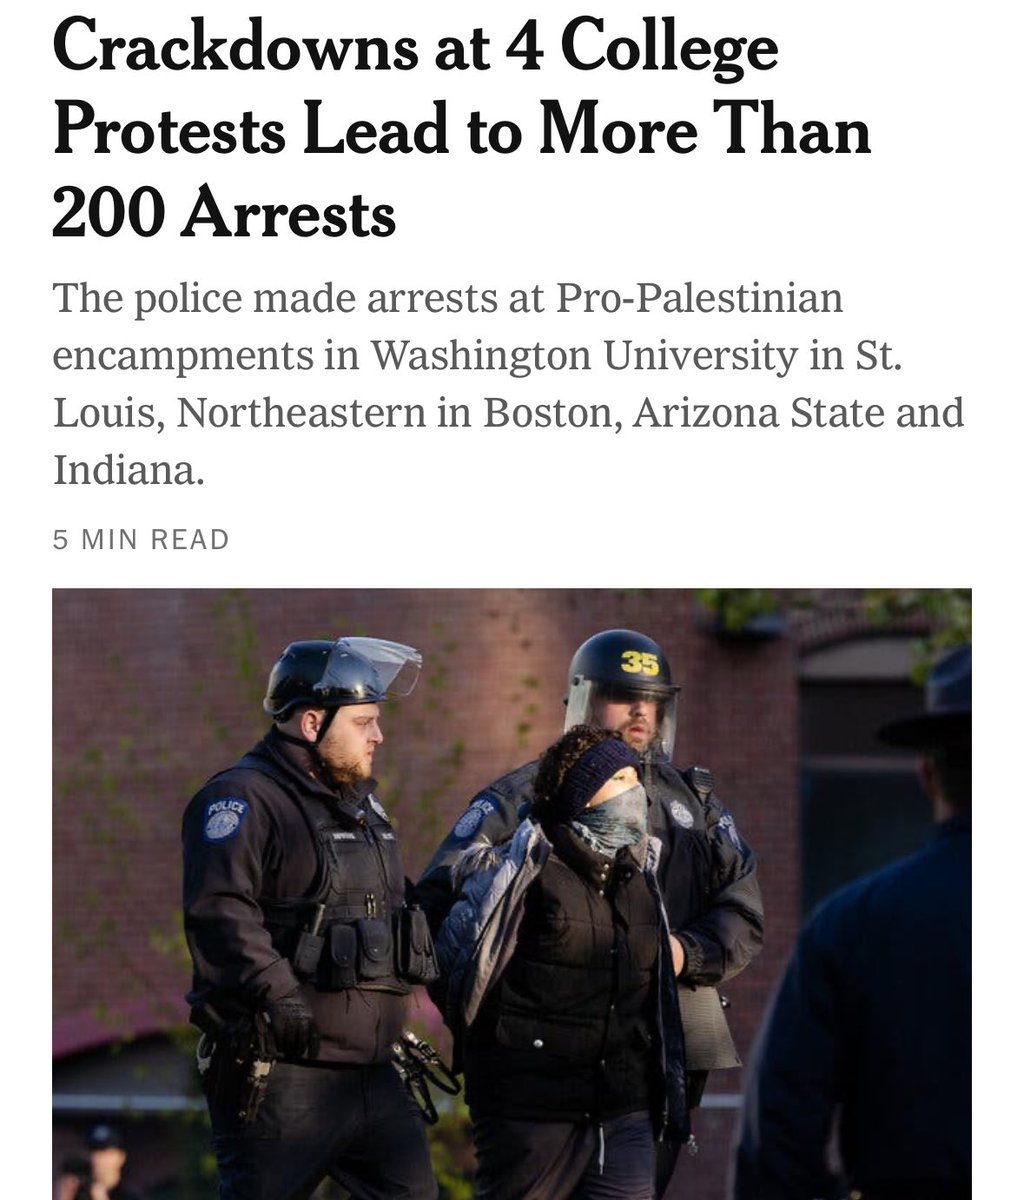 BREAKING: Police crackdowns this weekend targeting peaceful students protesting Israel's mass civilian slaughter in Gaza have pushed the arrest total nationwide to more than 1,000. This is a flagrant violation of free speech by universities with ties to Israel's war machine. ⤵️